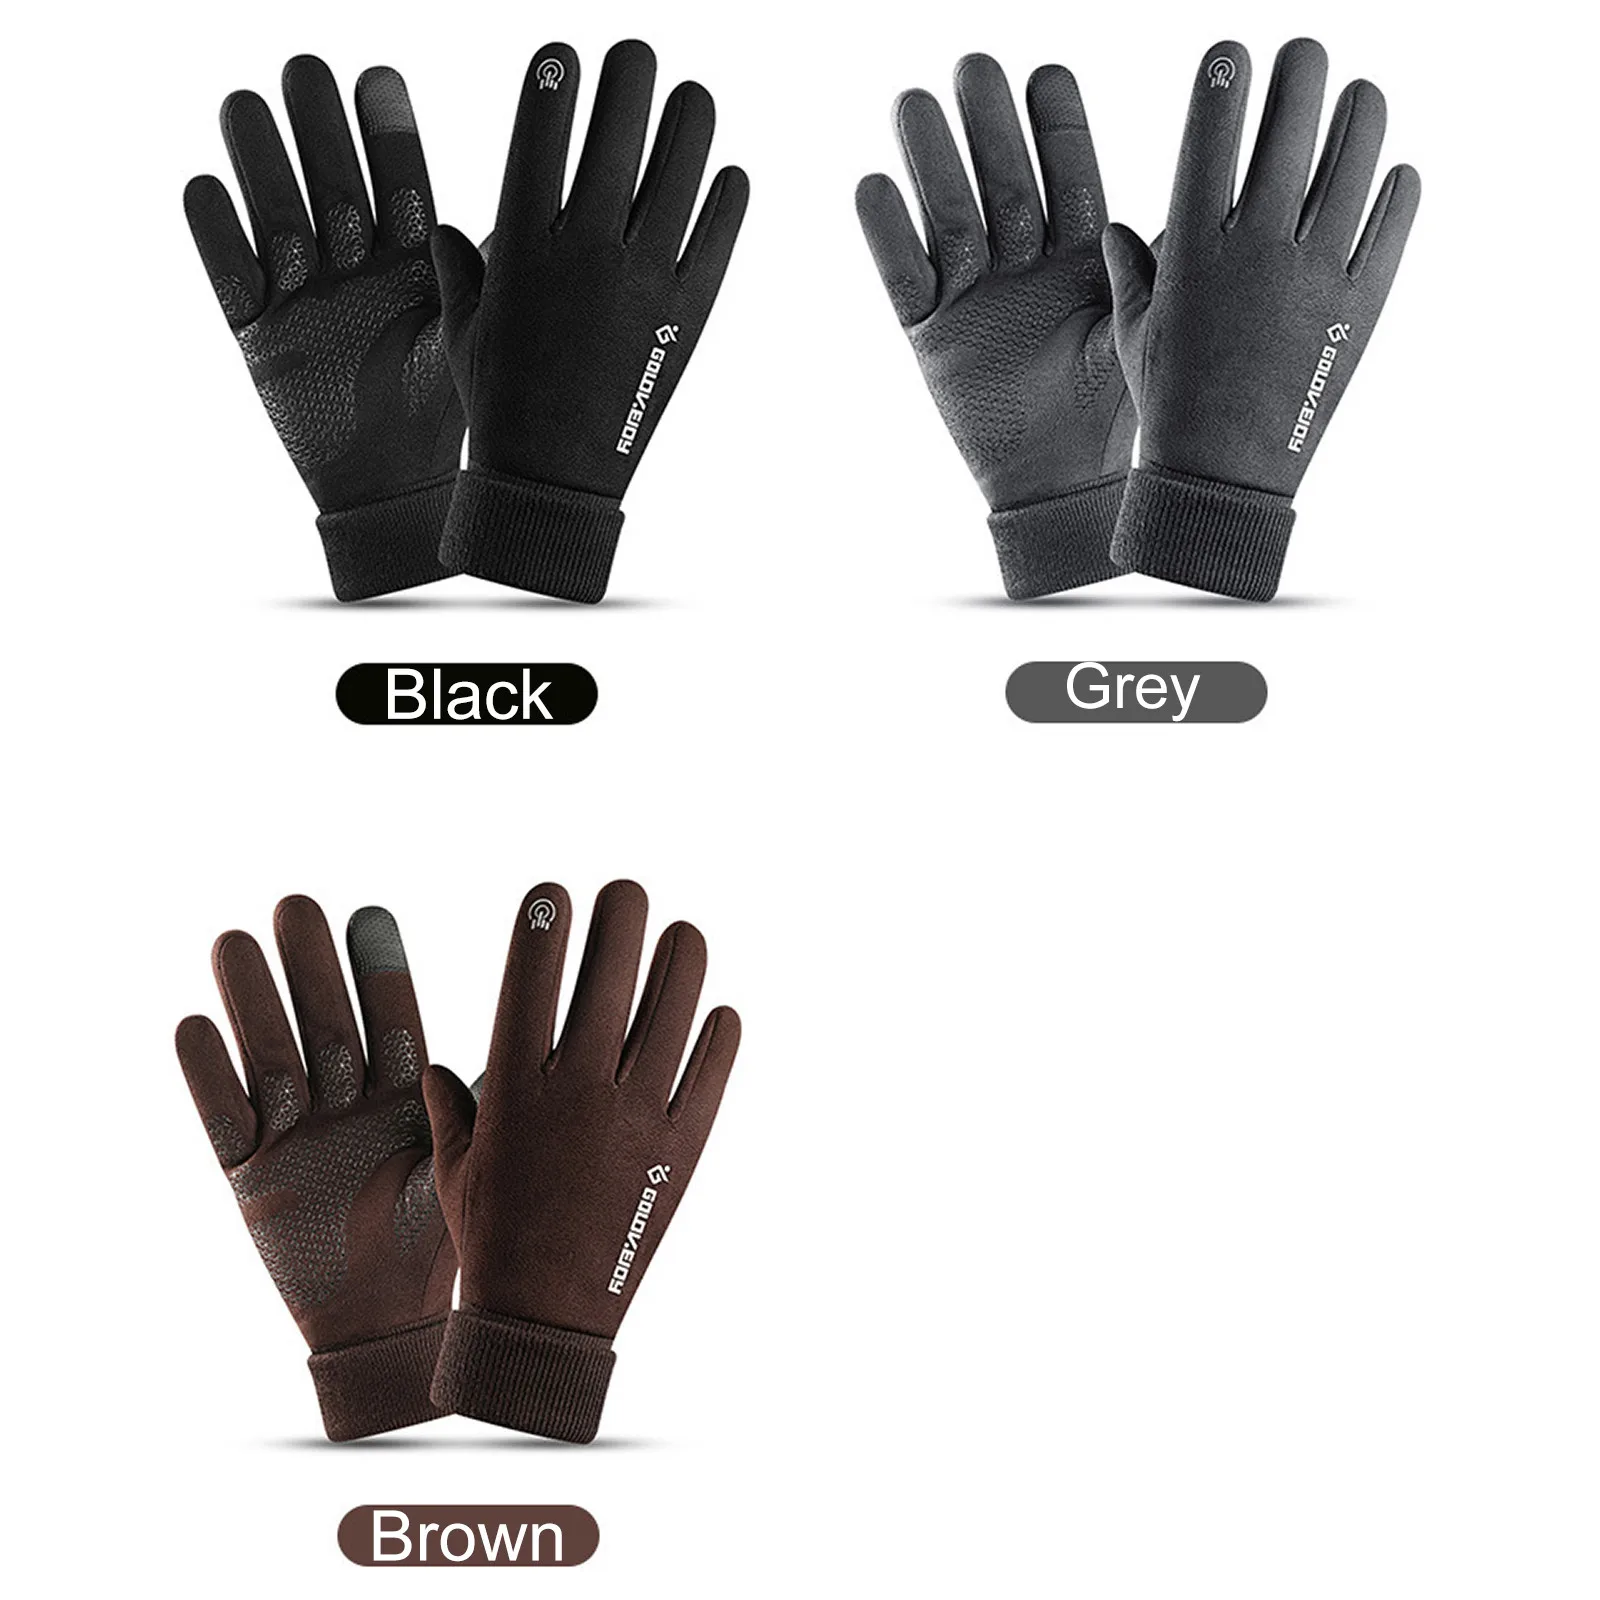 Cycling touch screen Gloves waterproof bicycle winter reflective outdoor gloves for men women plus velvet glove Full Finger